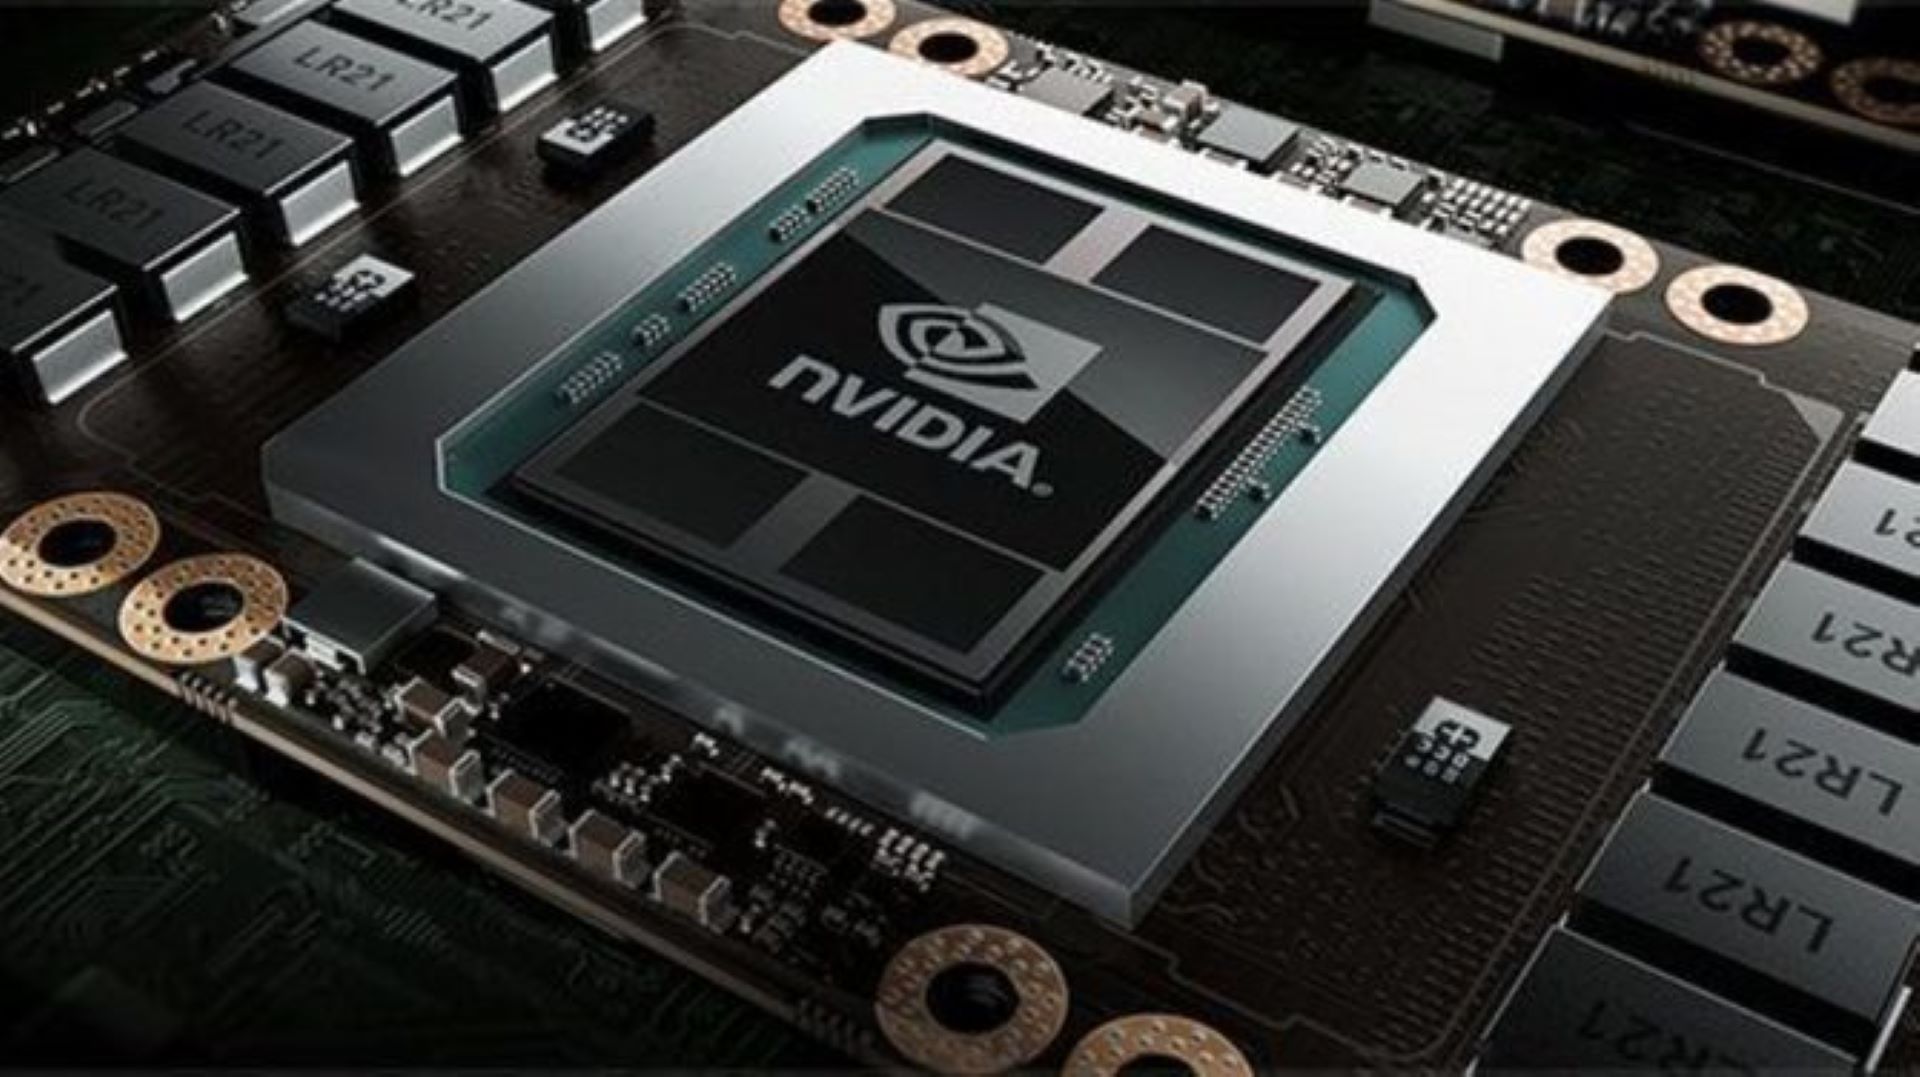 Nvidia GeForce RTX 4080 laptop graphics card shows up on Geekbench with remarkable performance uplift over Ampere